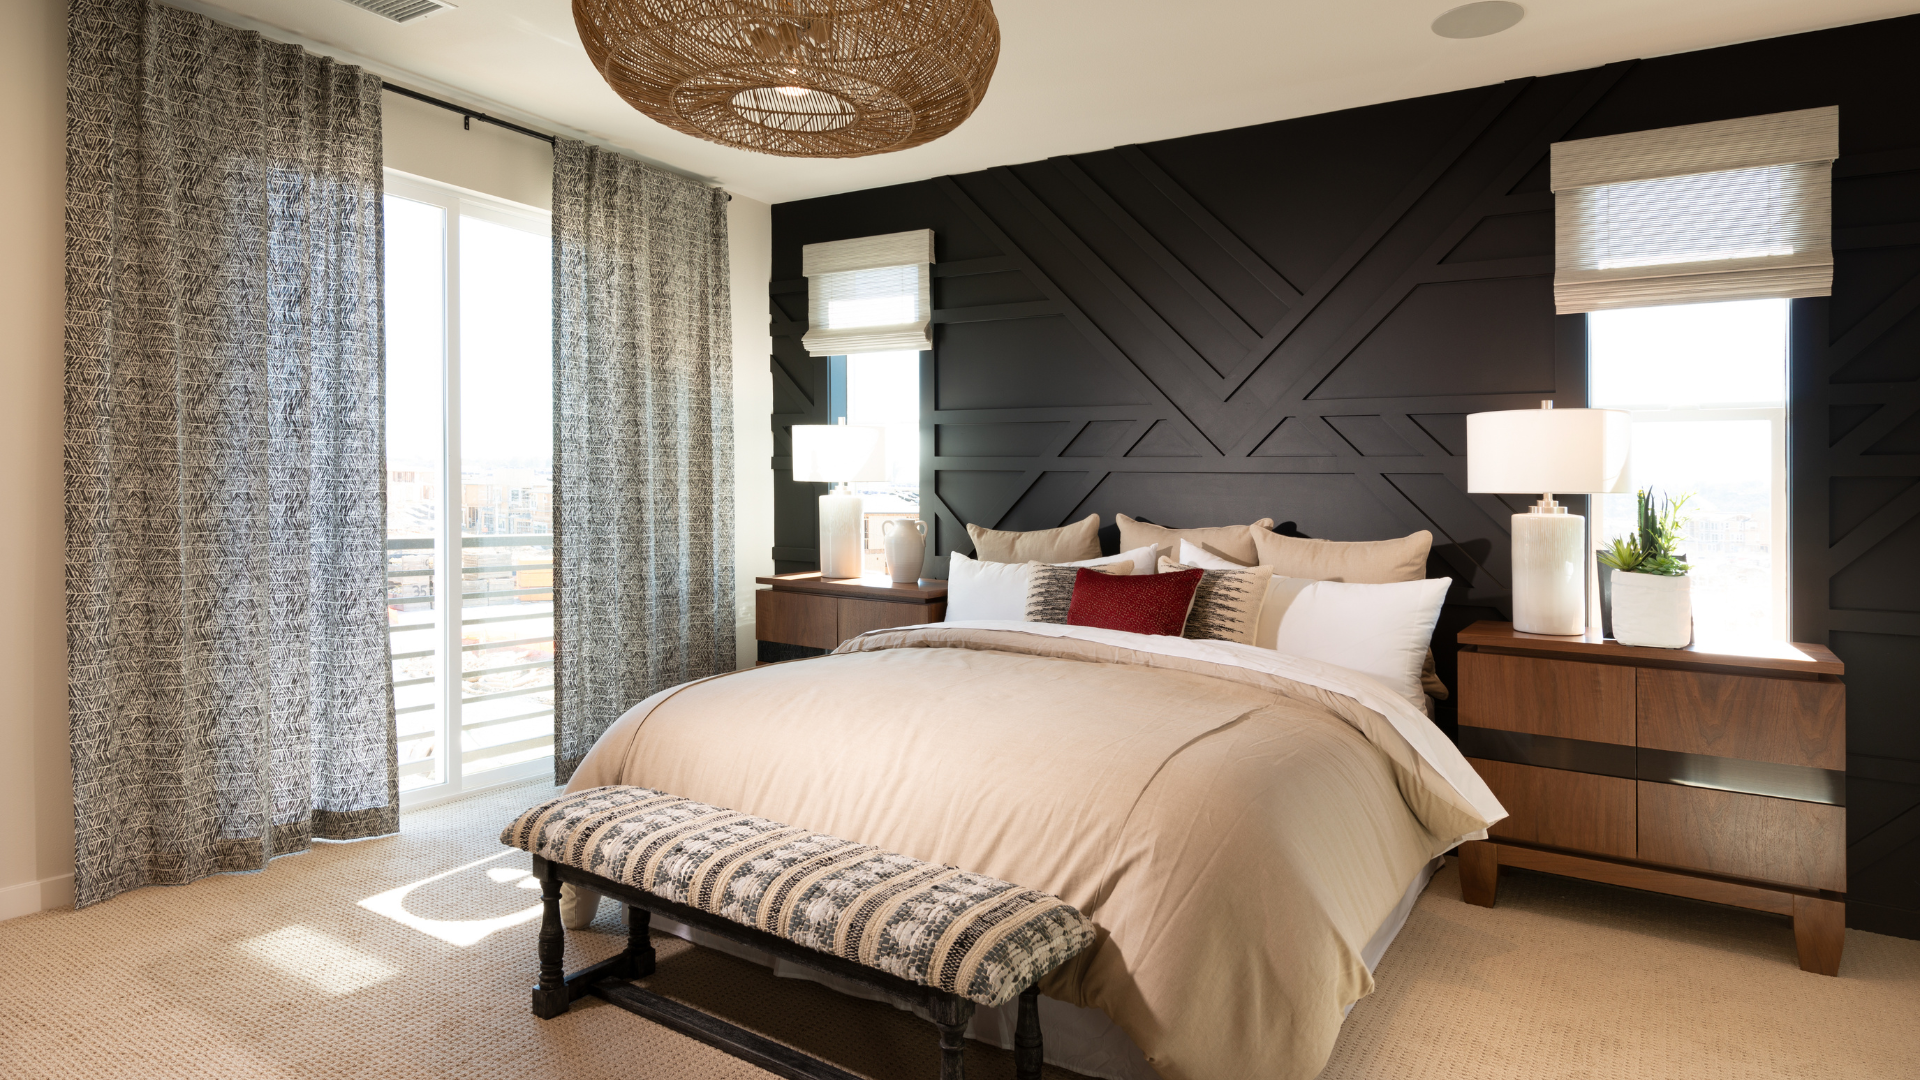 Image of the master bedroom in the plan 1 at AERO at 3Roots